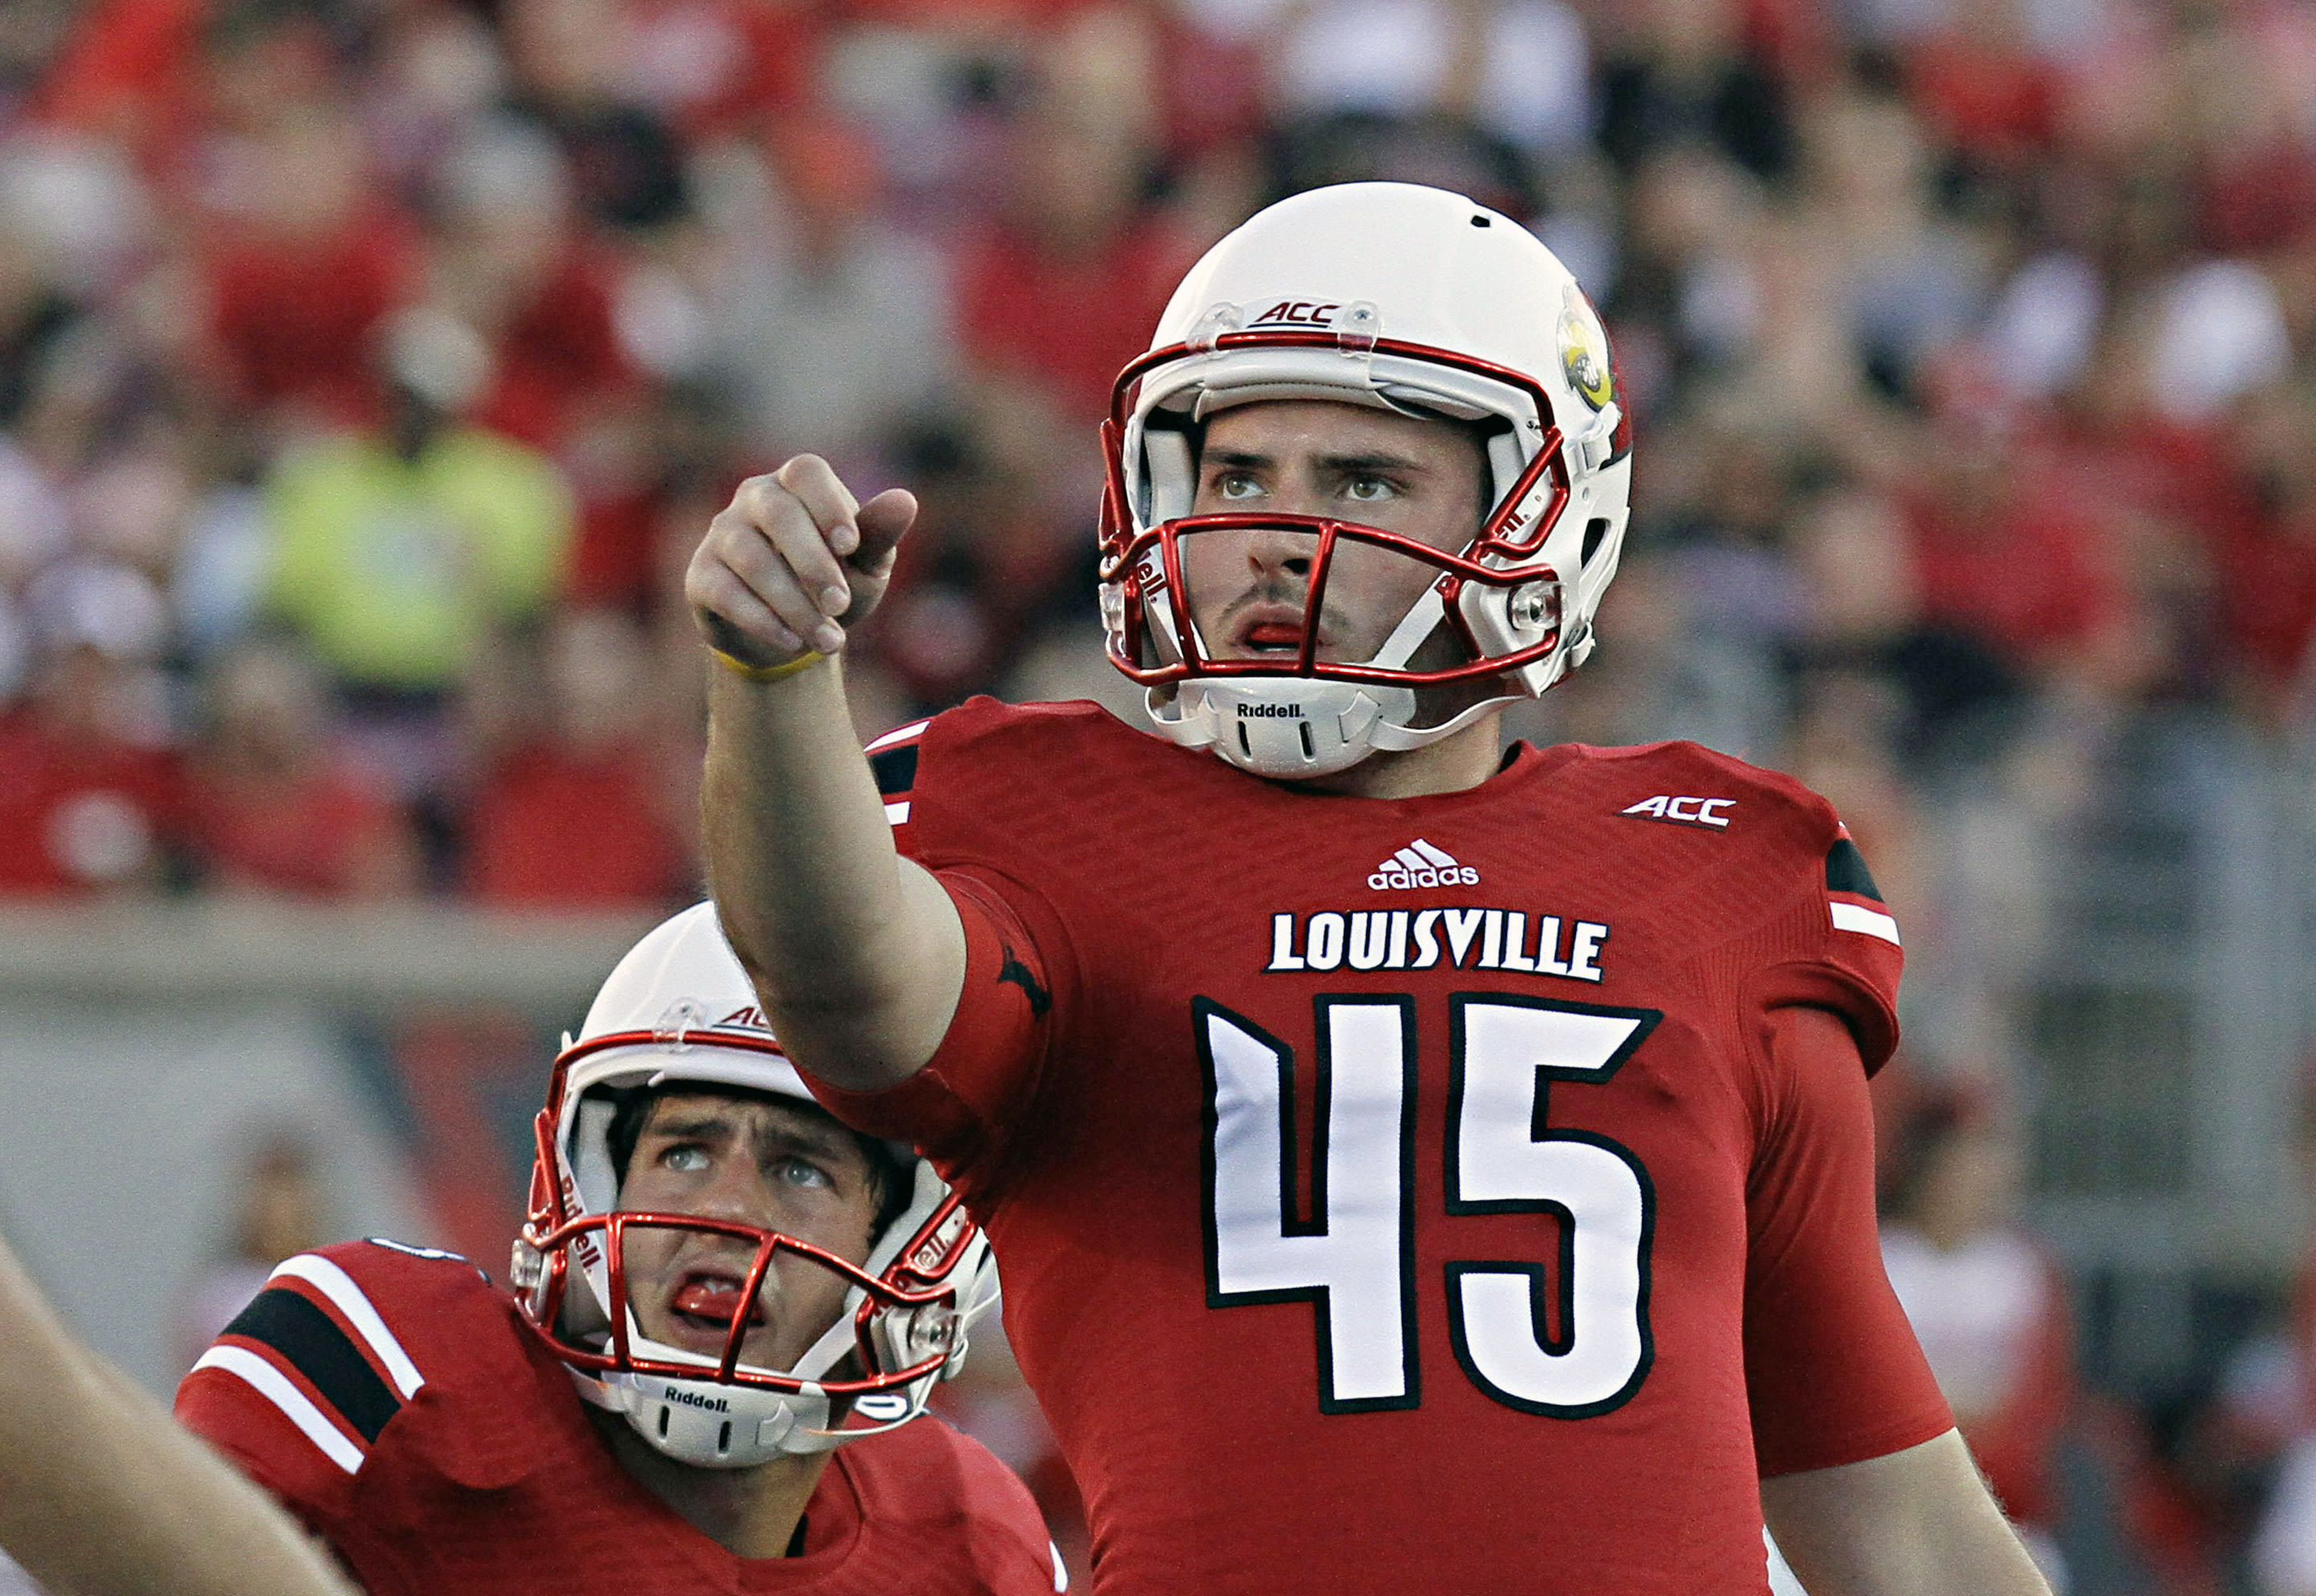 John Wallace, Louisville's career leader in field goals and attempts, dies. His 384 points rank 2nd